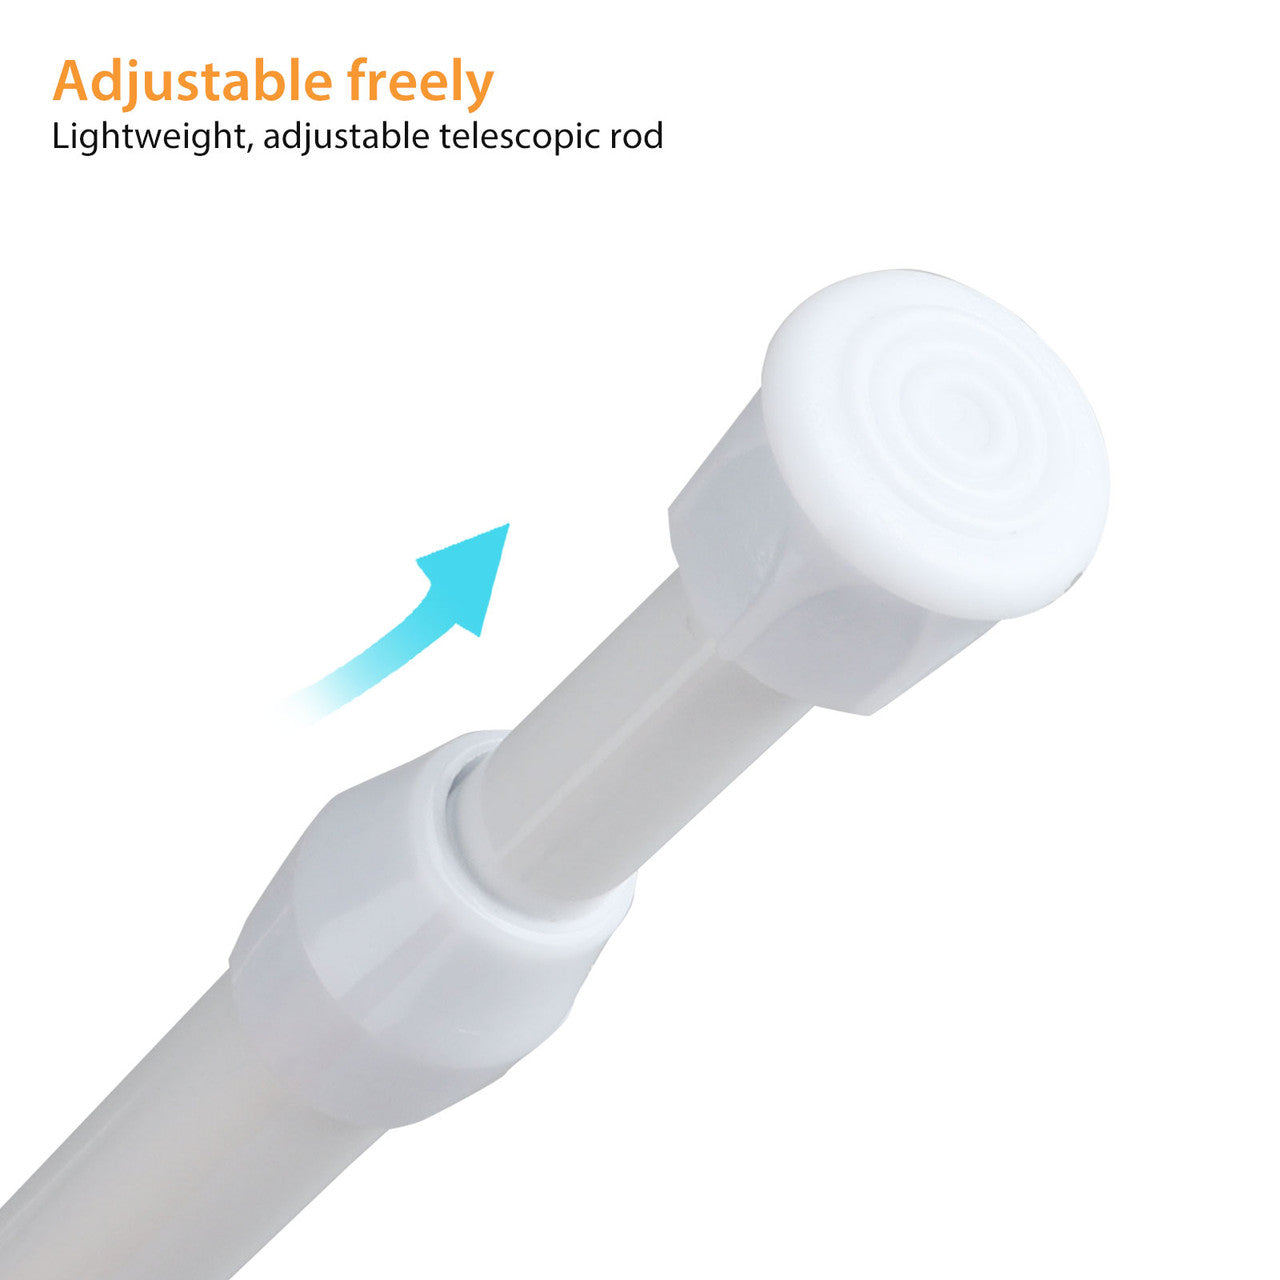 Adjustable Tension Rods 11.8" to 27.6", 1Pcs Spring Tension Rods, Extension Spring Rods Closet Rod Cupboard Bars Tensions Rod for Windows,Kitchen, Bathroom,Cupboard,Wardrobe (White)